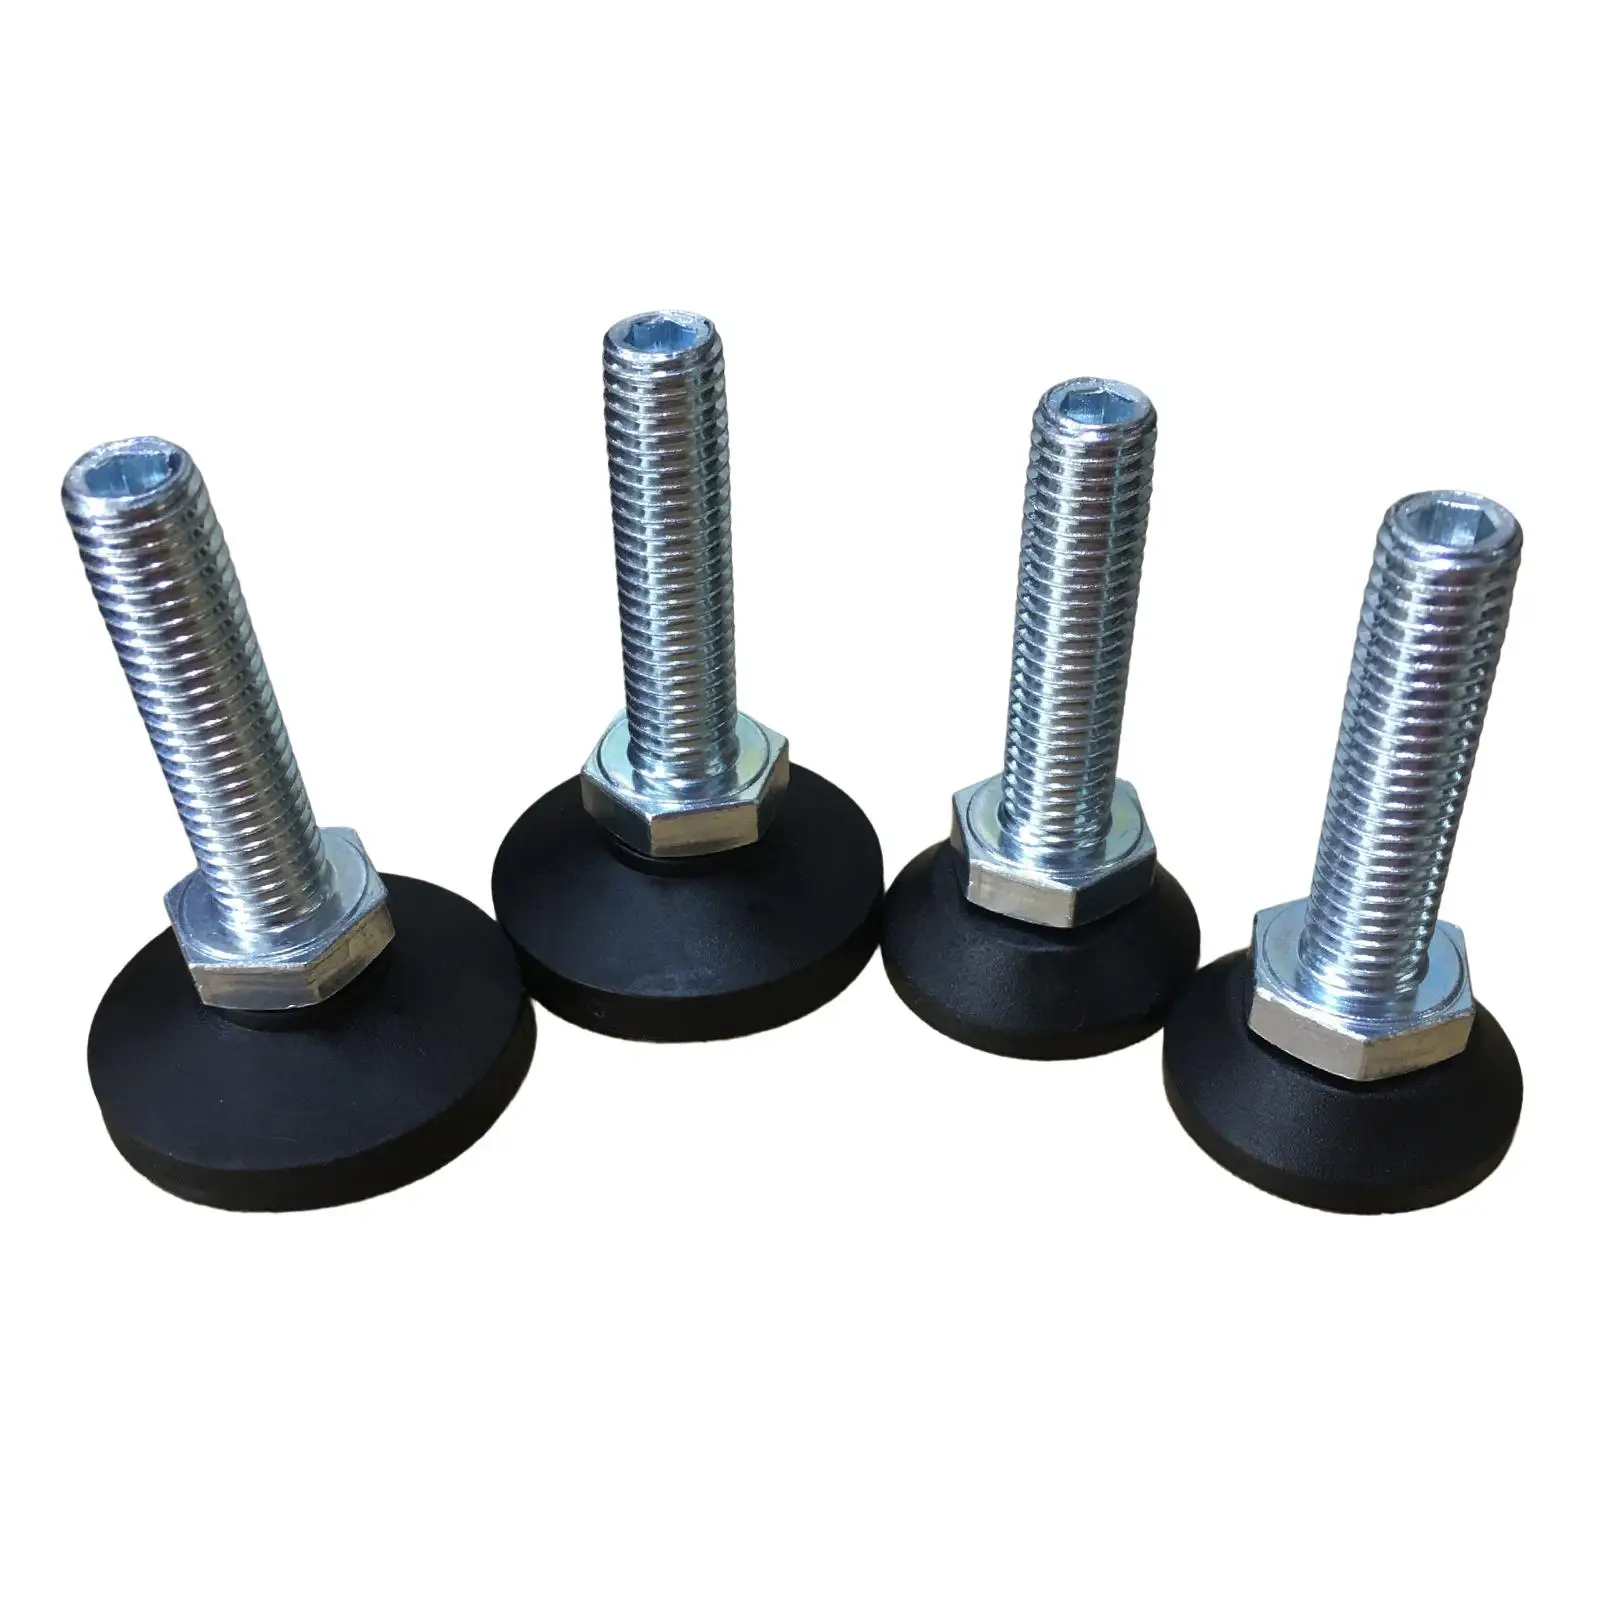 4 Pieces Adjustable Furniture Leveling Feets M10 Threaded Nonslip Adjustable Heavy Duty Furniture Legs Levelers for Bench Table